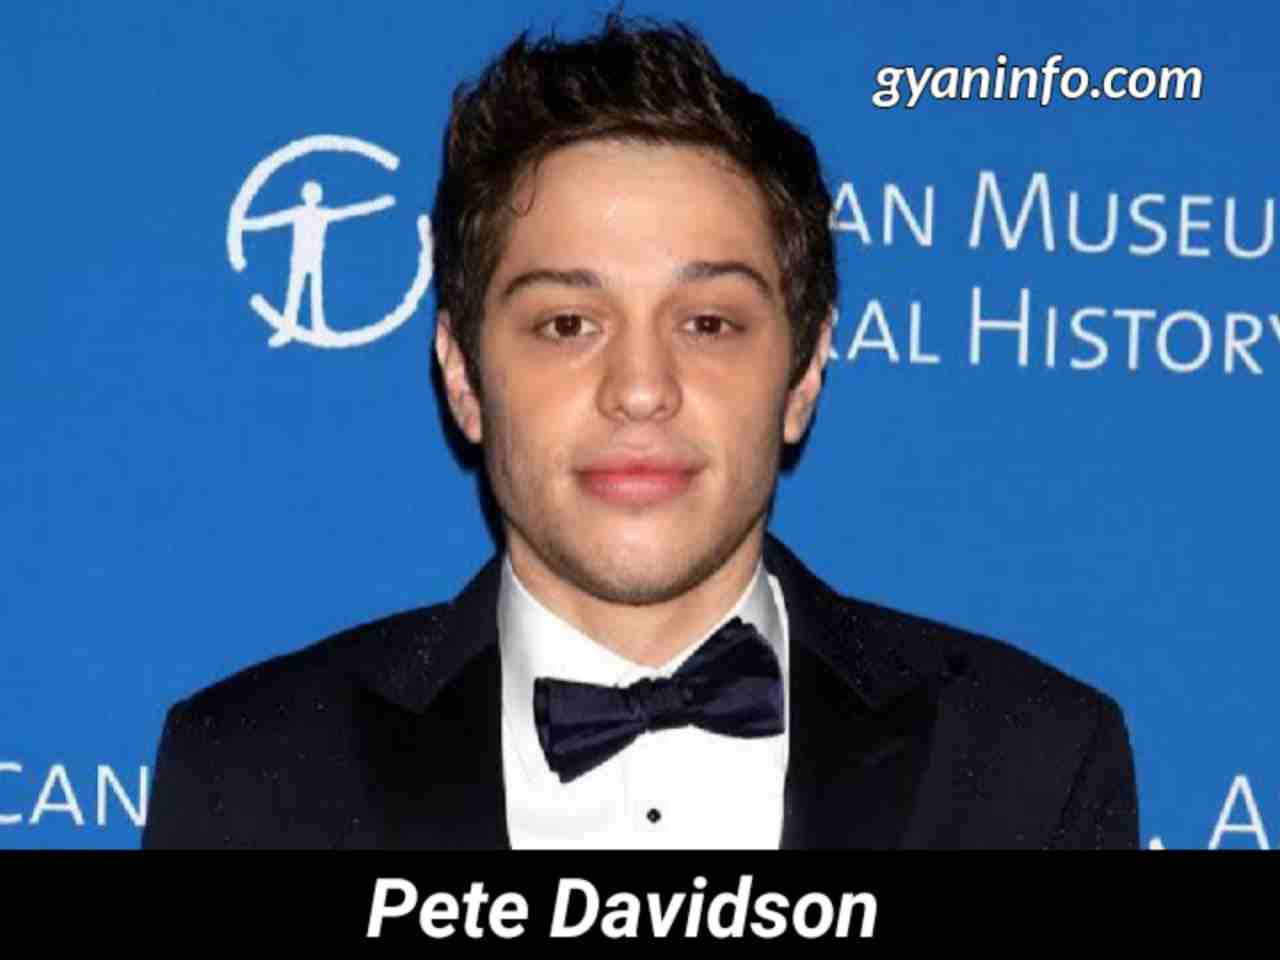 Pete Davidson Biography, Age, Height, Wife, Girlfriend, Net Worth & More